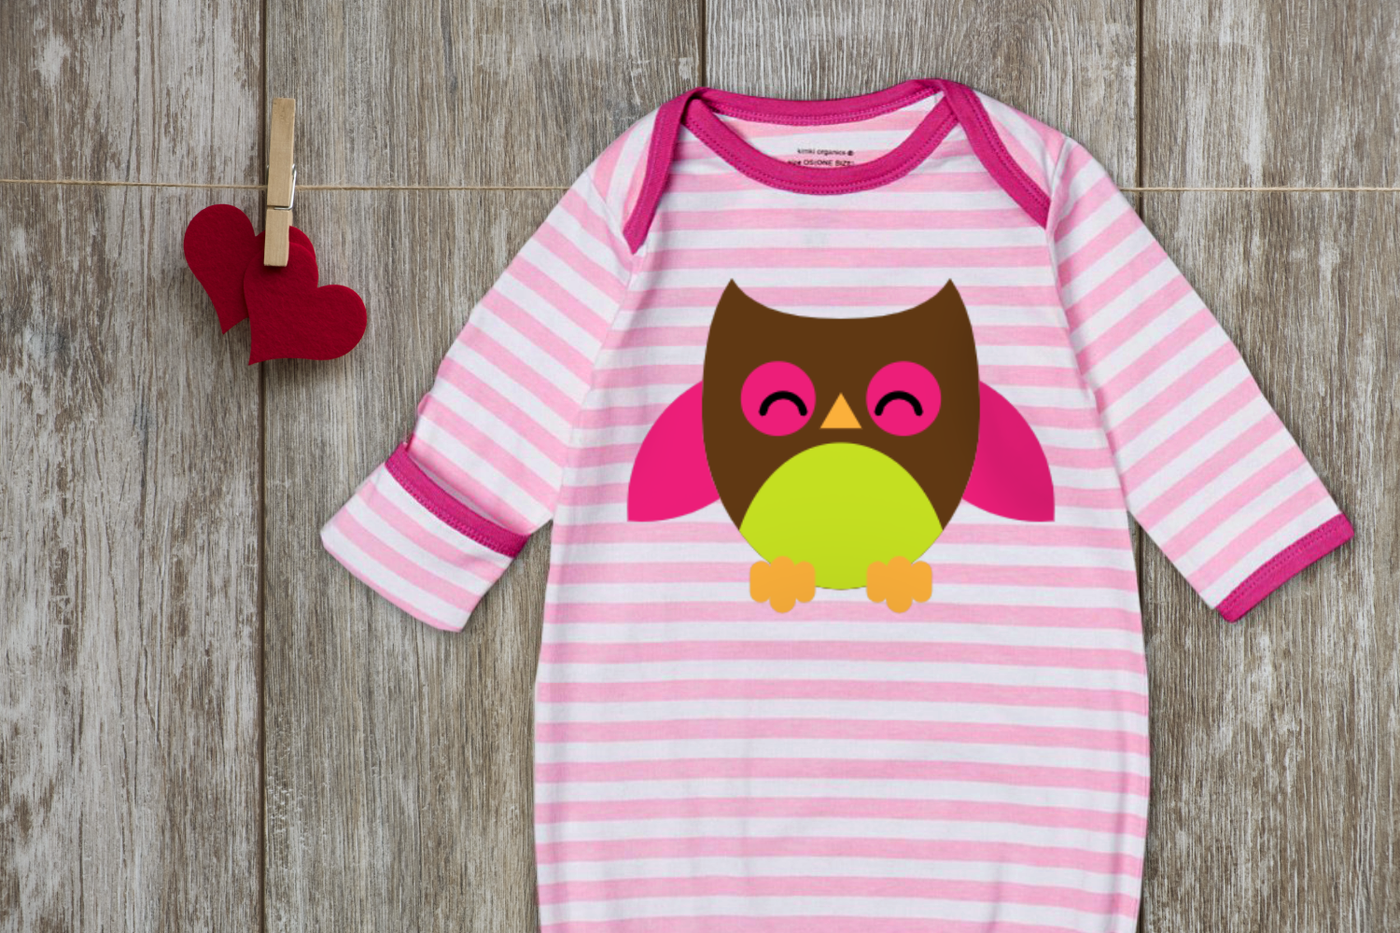 A pink and white striped baby sleep sac decorated with a cute smiling owl.